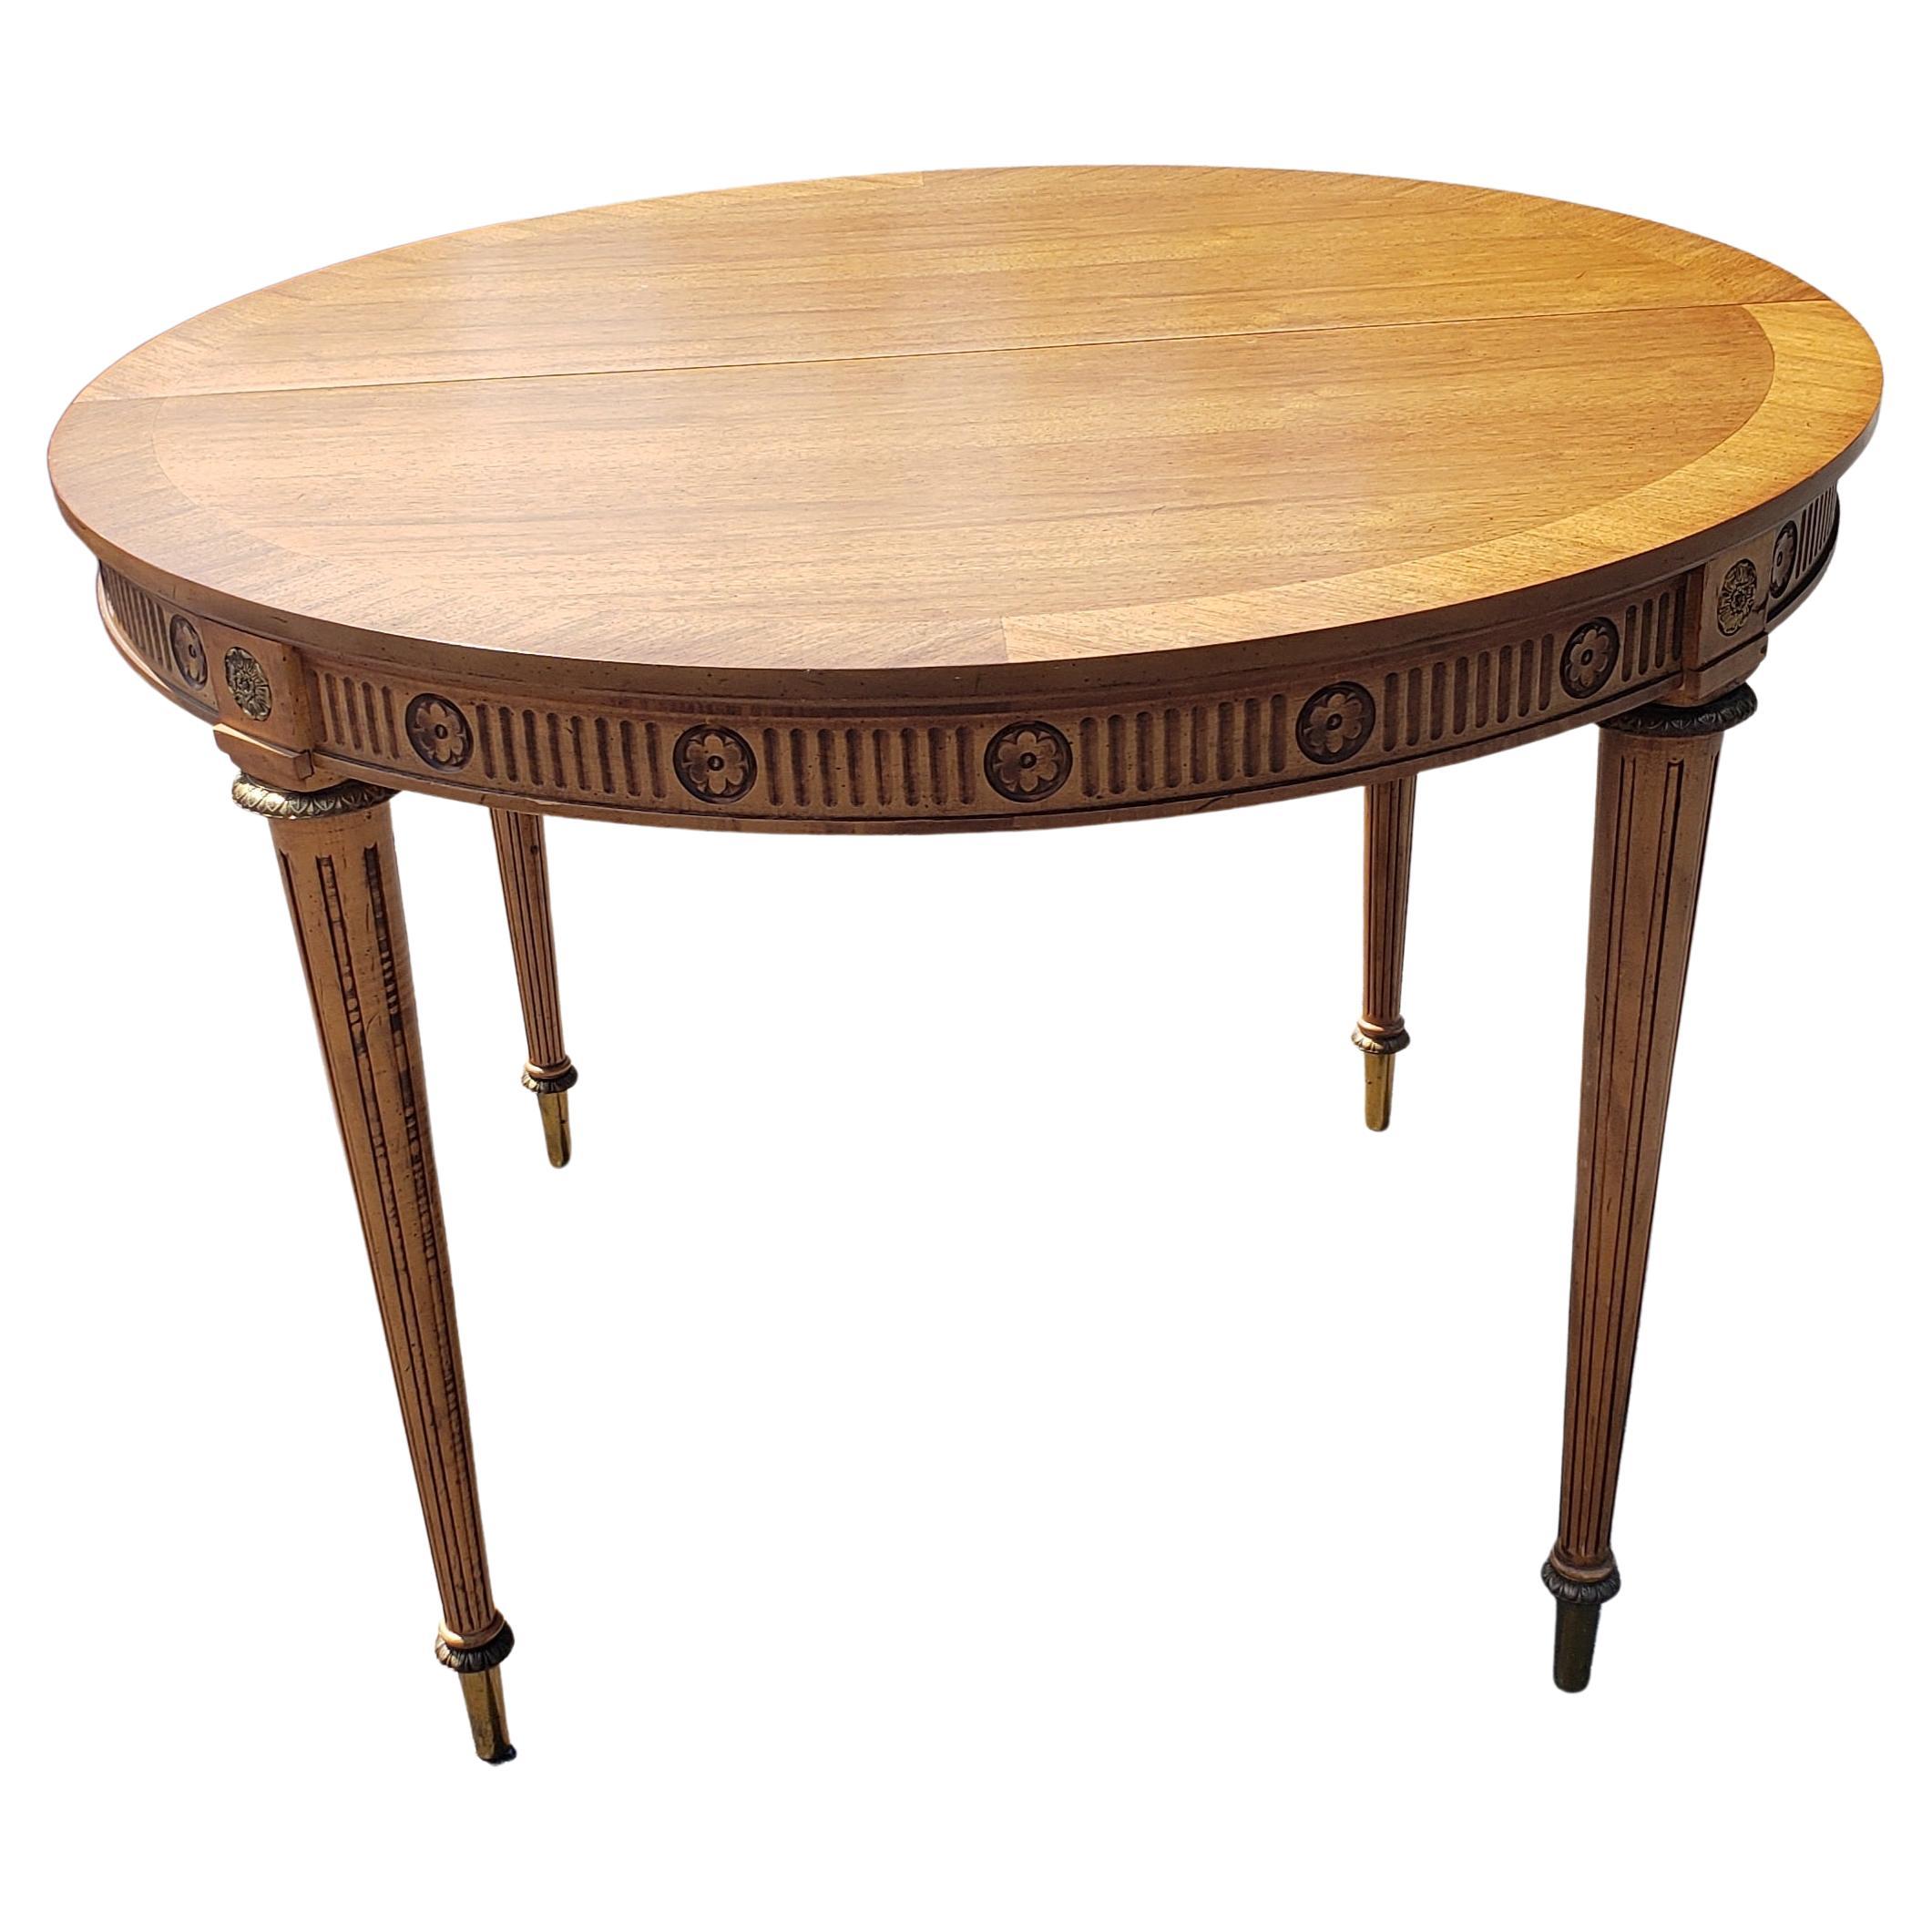 French Provincial J.L. Metz Furniture French Walnut and Brass Extension Dining Table with 2 Leaves For Sale